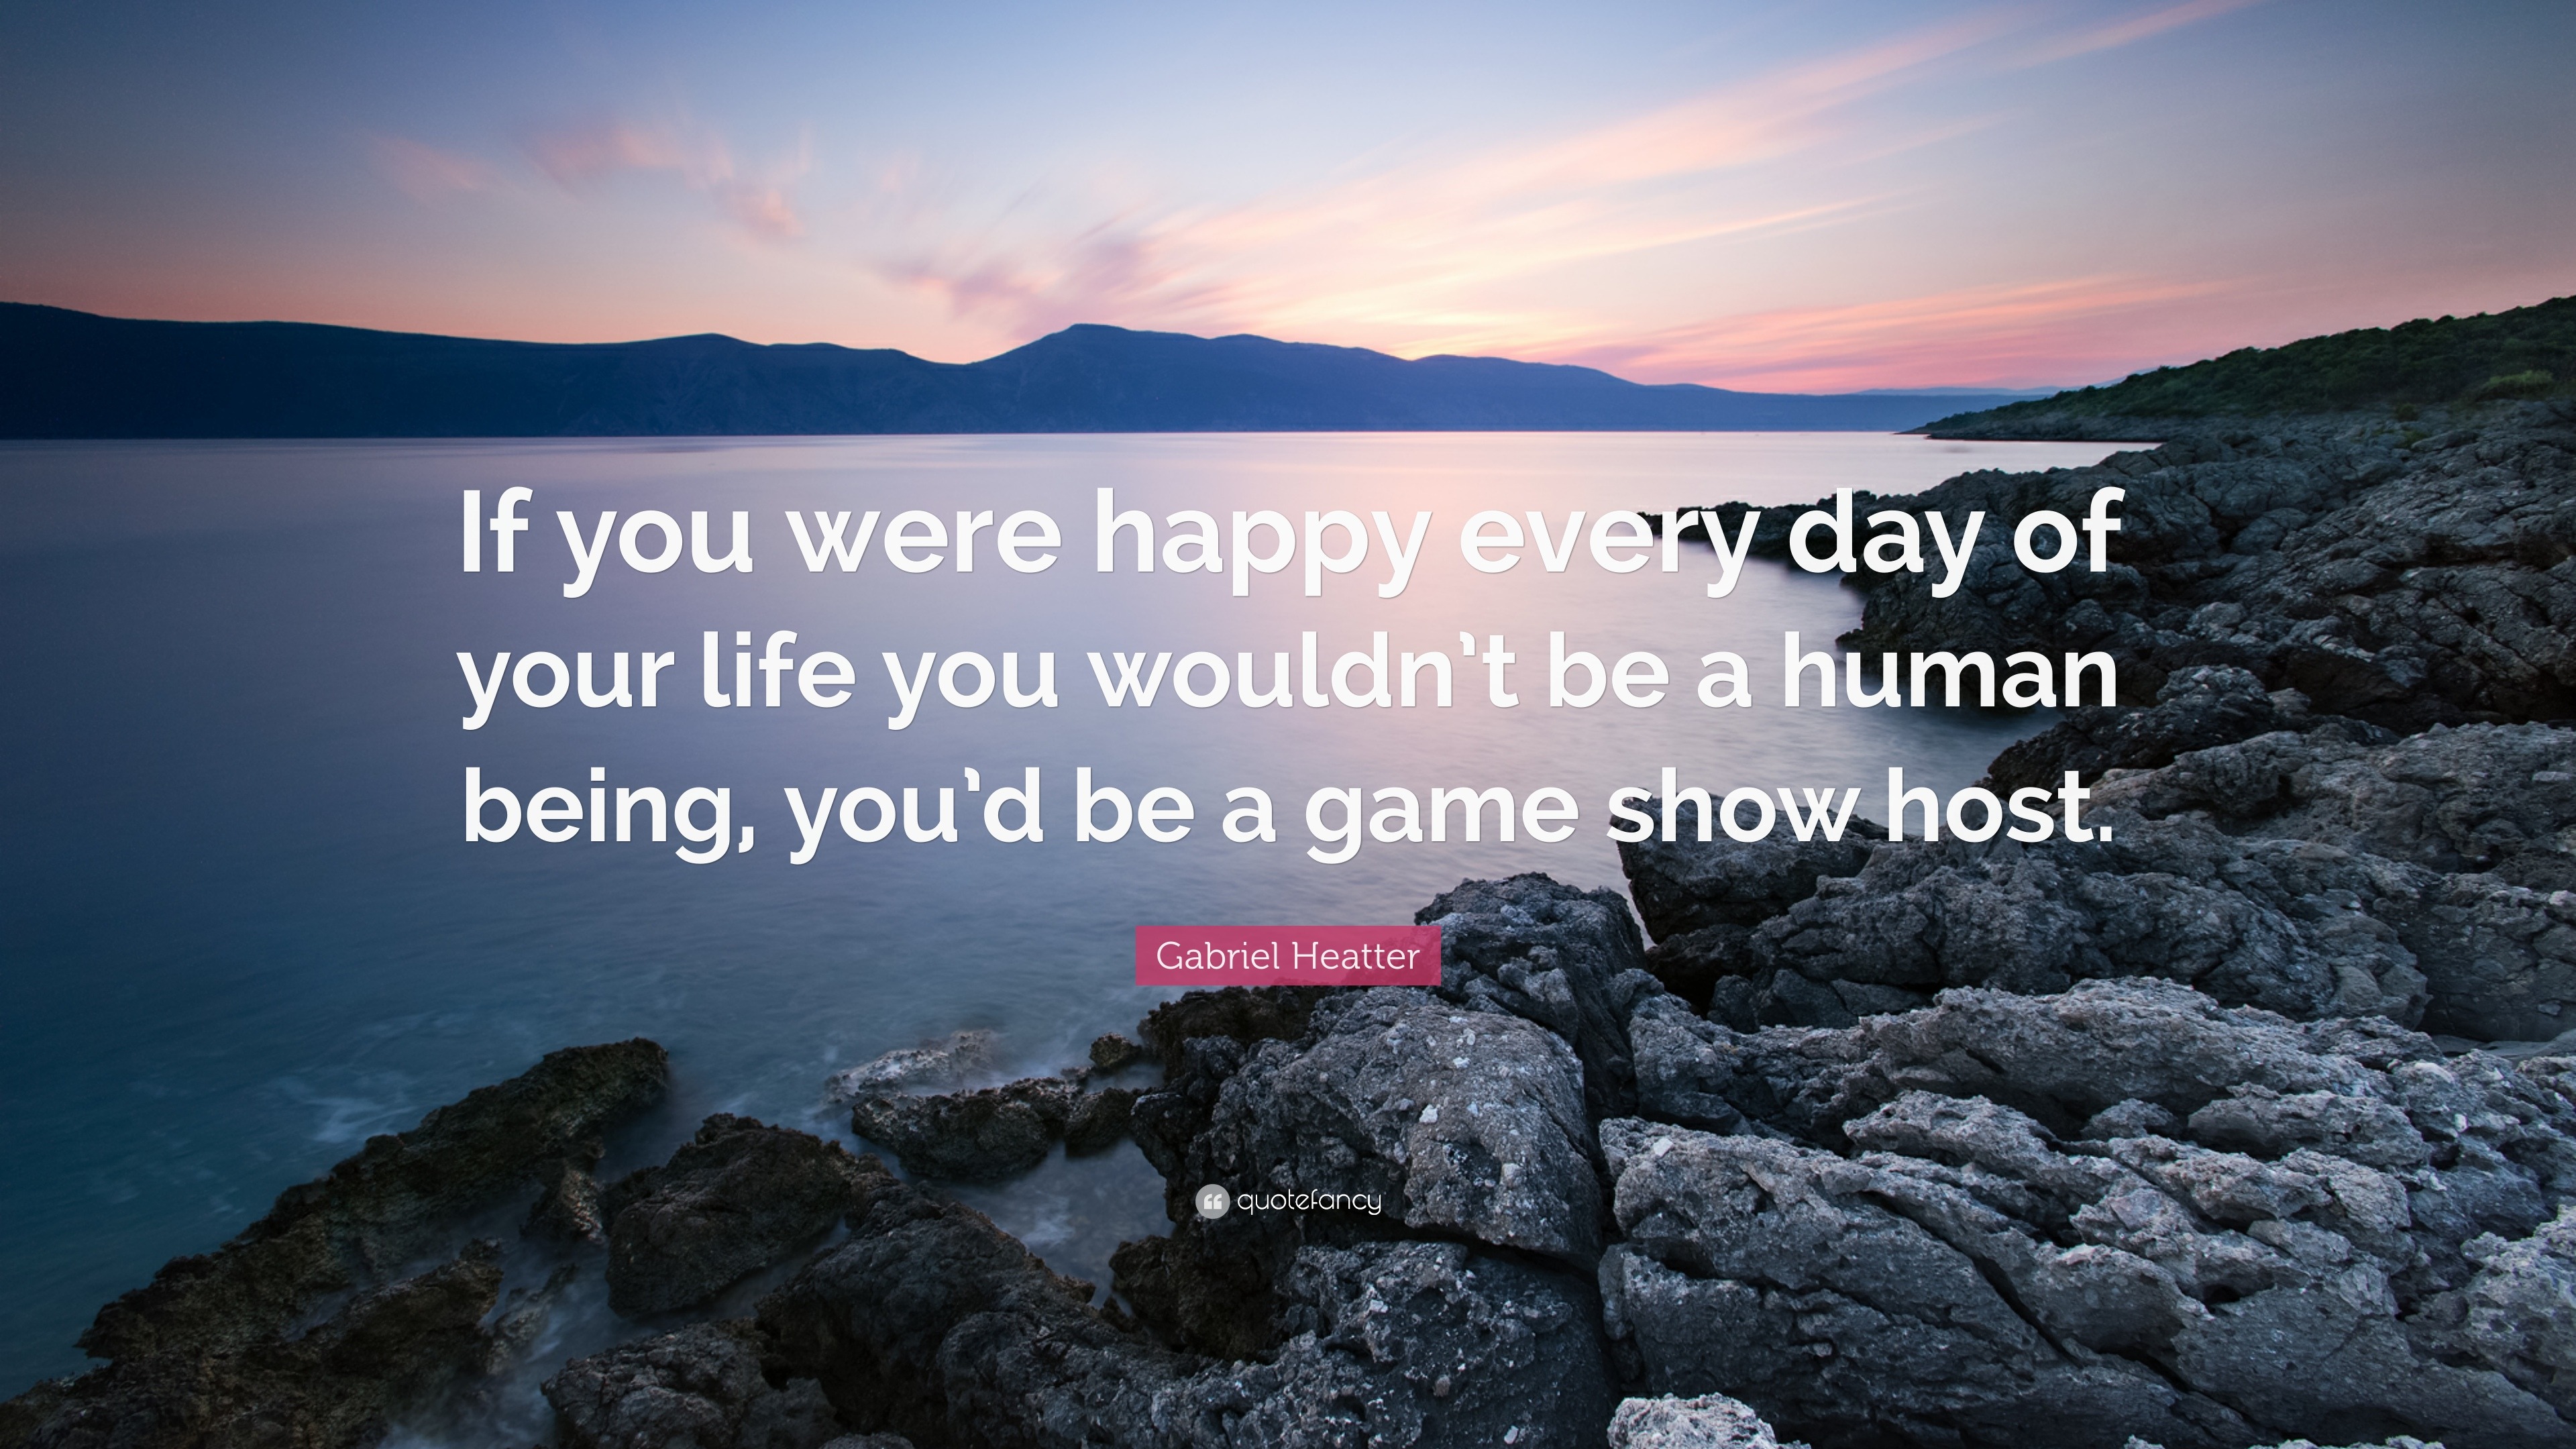 Gabriel Heatter Quote: “If you were happy every day of your life